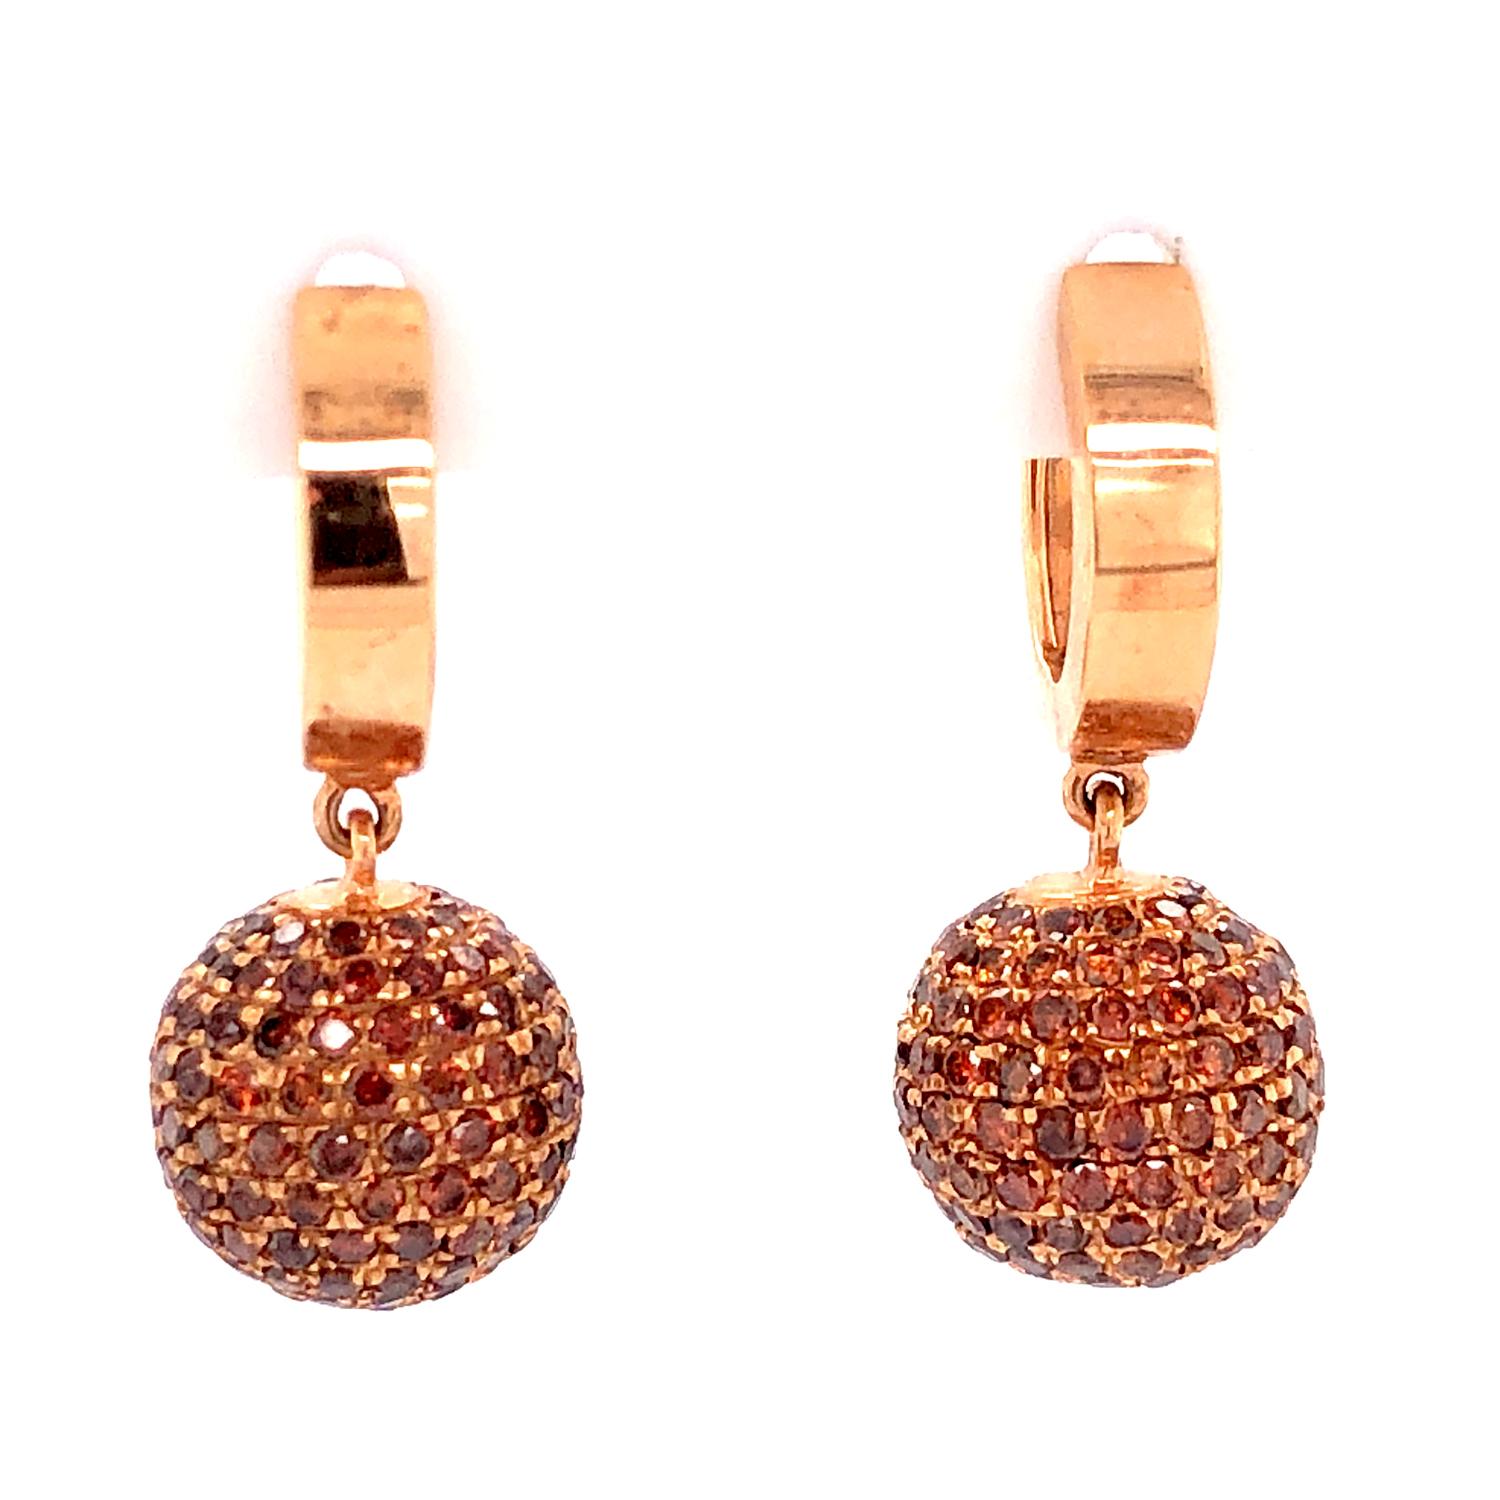 Mixed Cut Pave Brown Diamond Ball Earrings Made in 18k Rose Gold For Sale